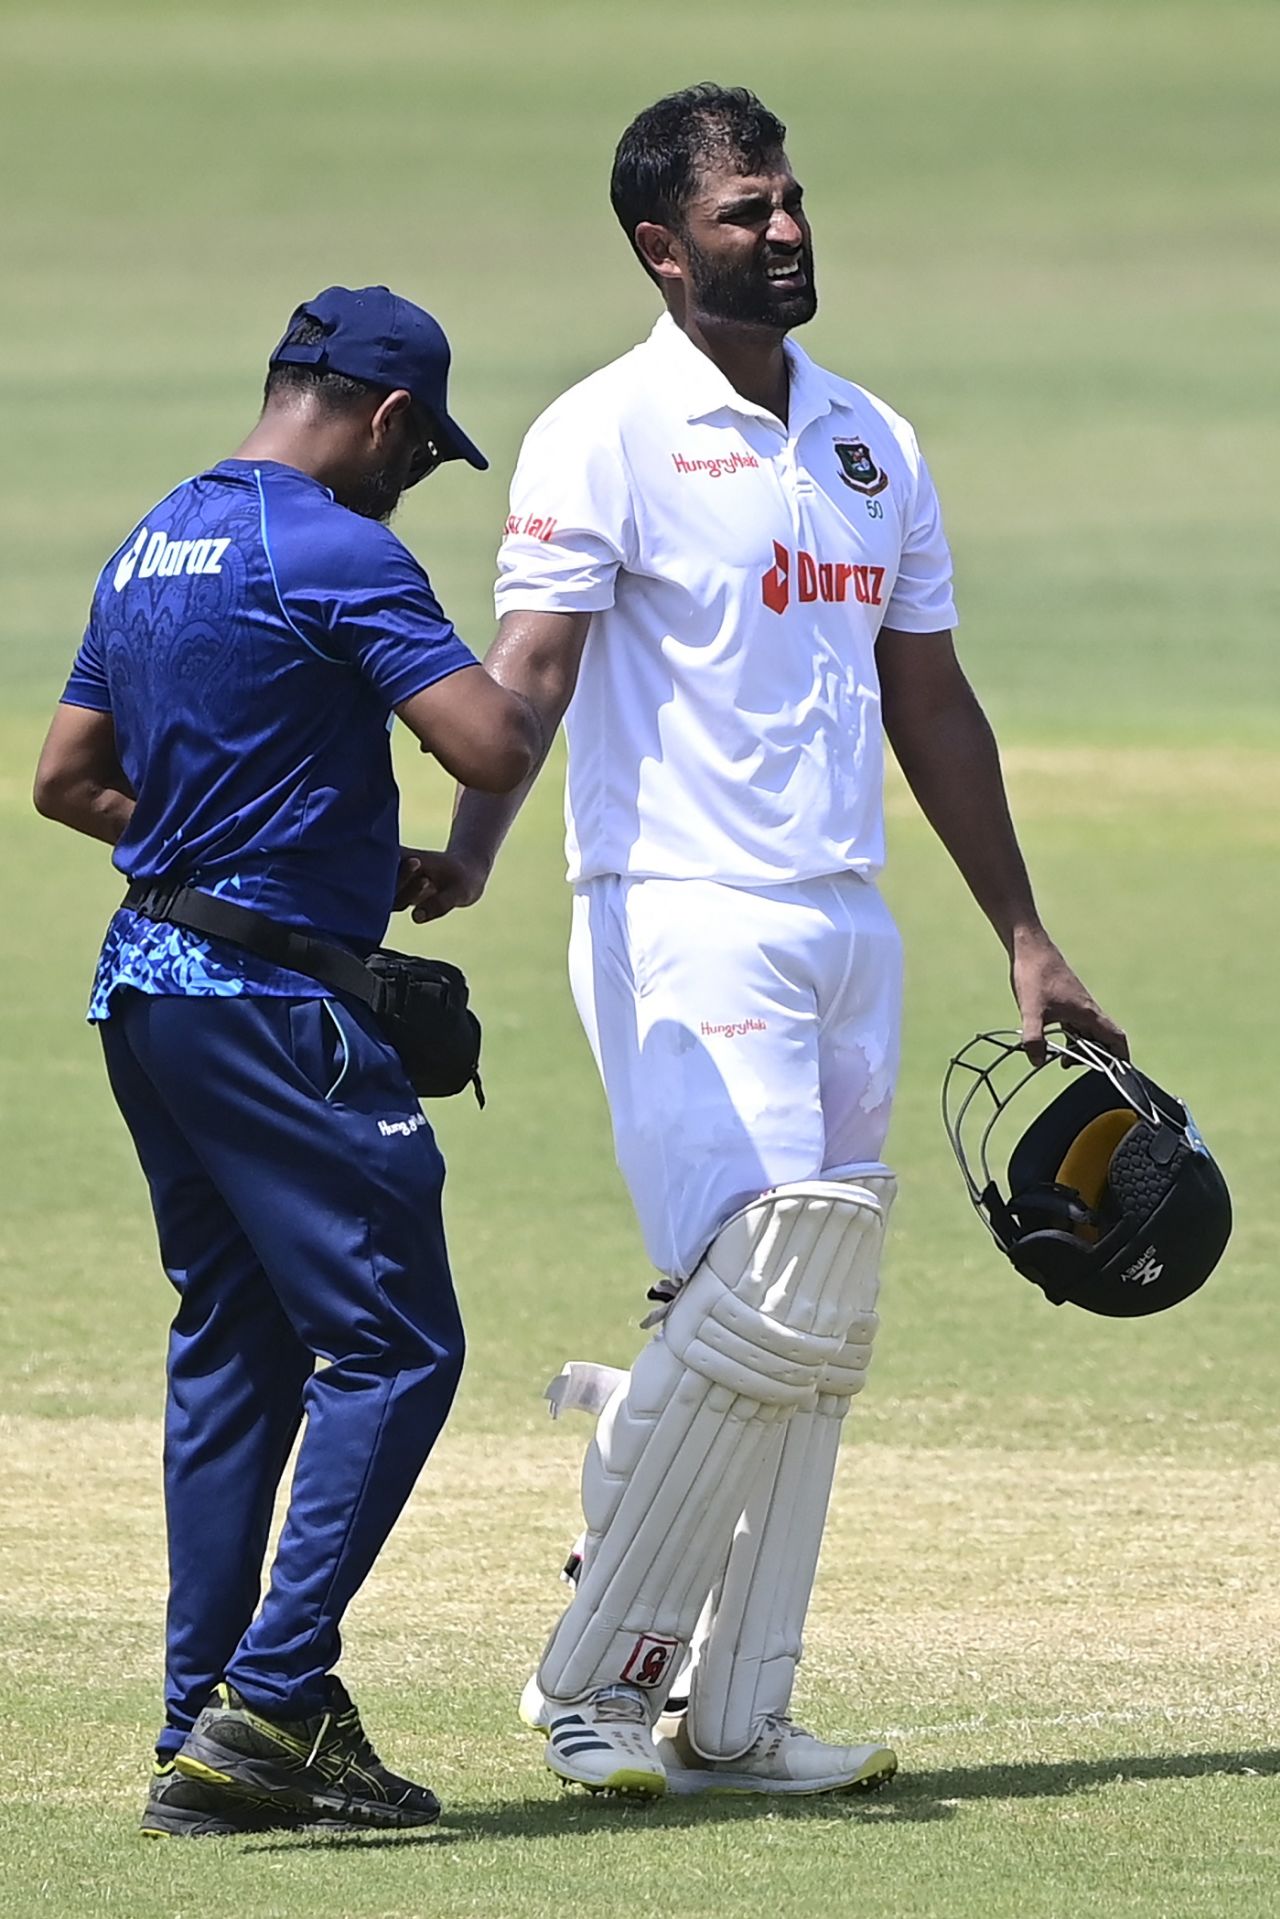 Tamim Iqbal was retired out on 133, Bangladesh vs Sri Lanka, 1st Test, Chattogram, 3rd day, May 17, 2022